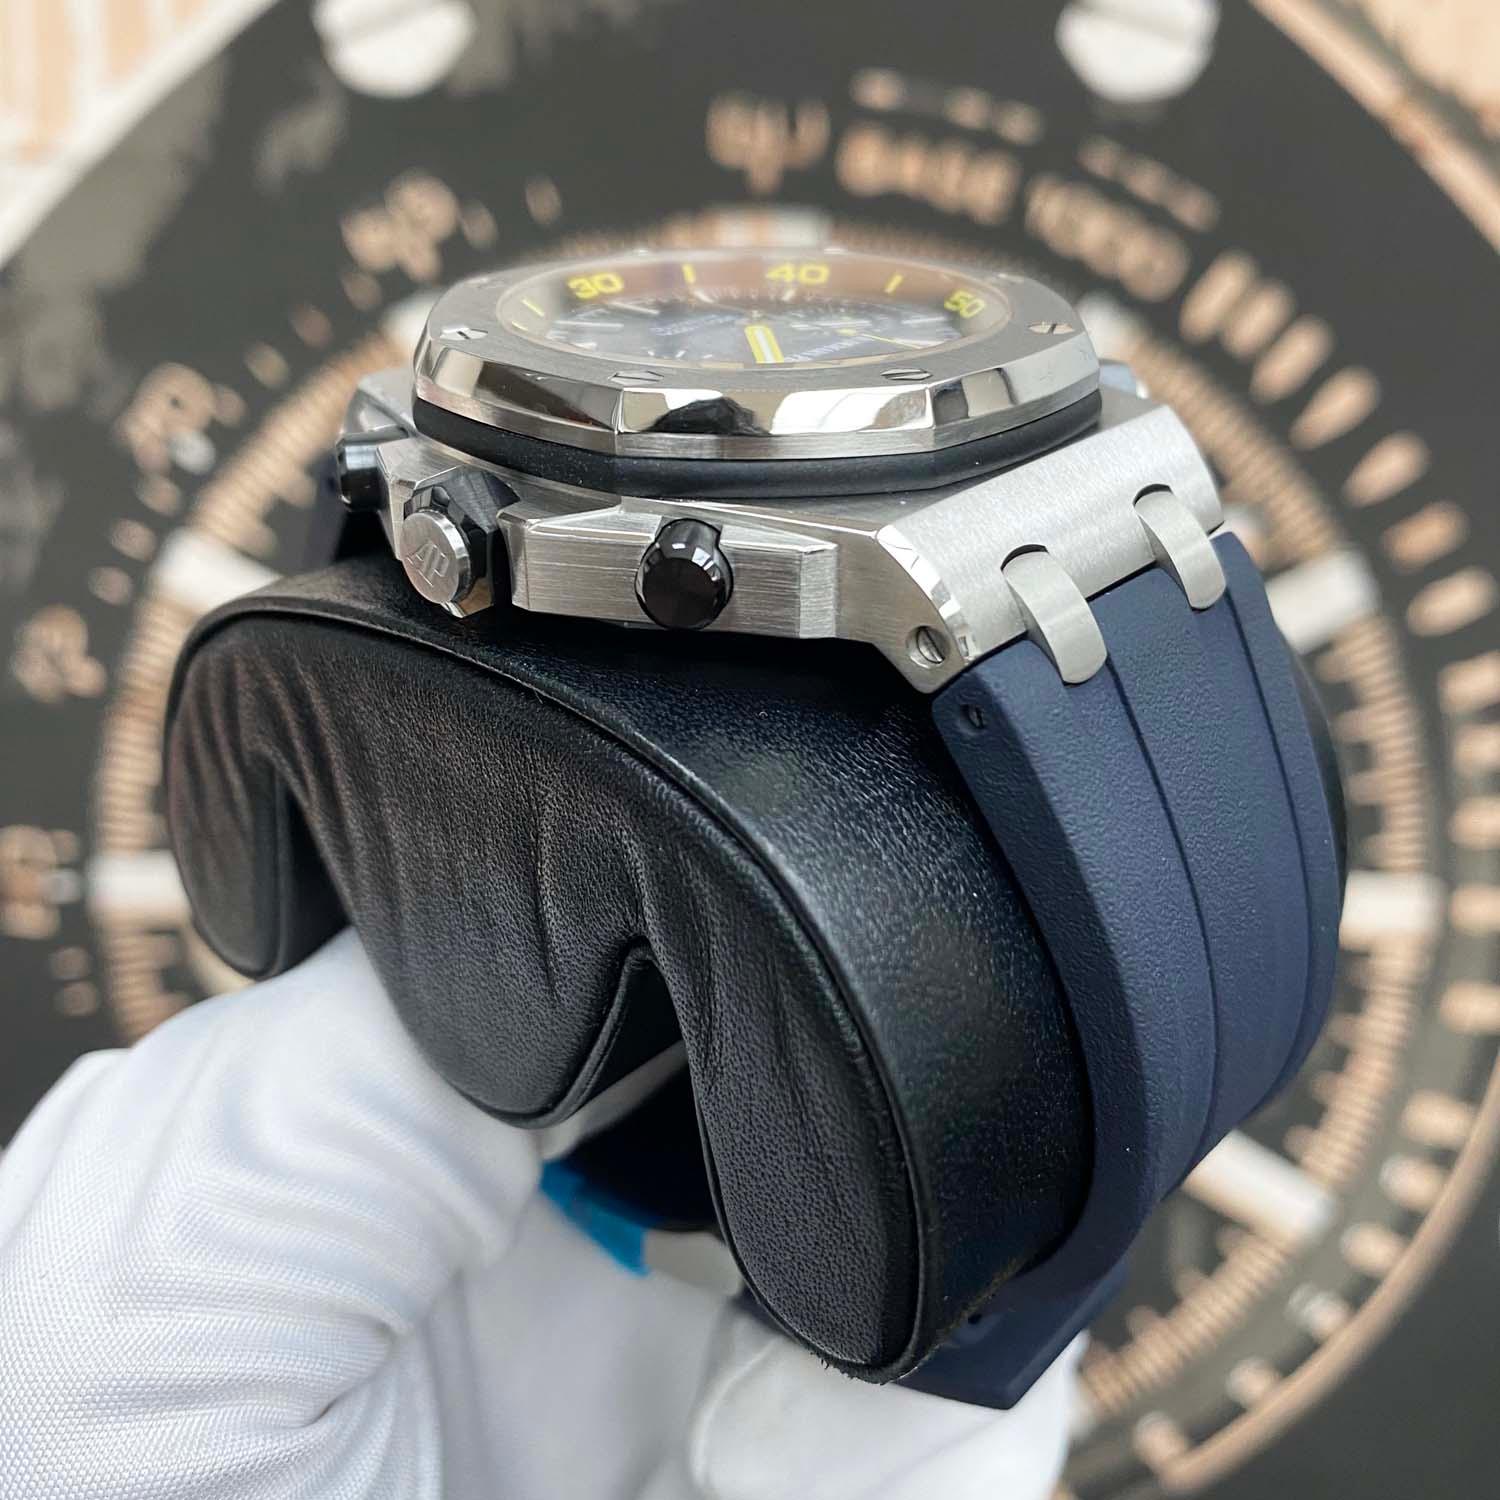 Audemars Piguet Limited Edition Royal Oak Offshore Diver 42mm 26703ST.OO.A027CA.01 Blue Dial Pre-Owned - Gotham Trading 